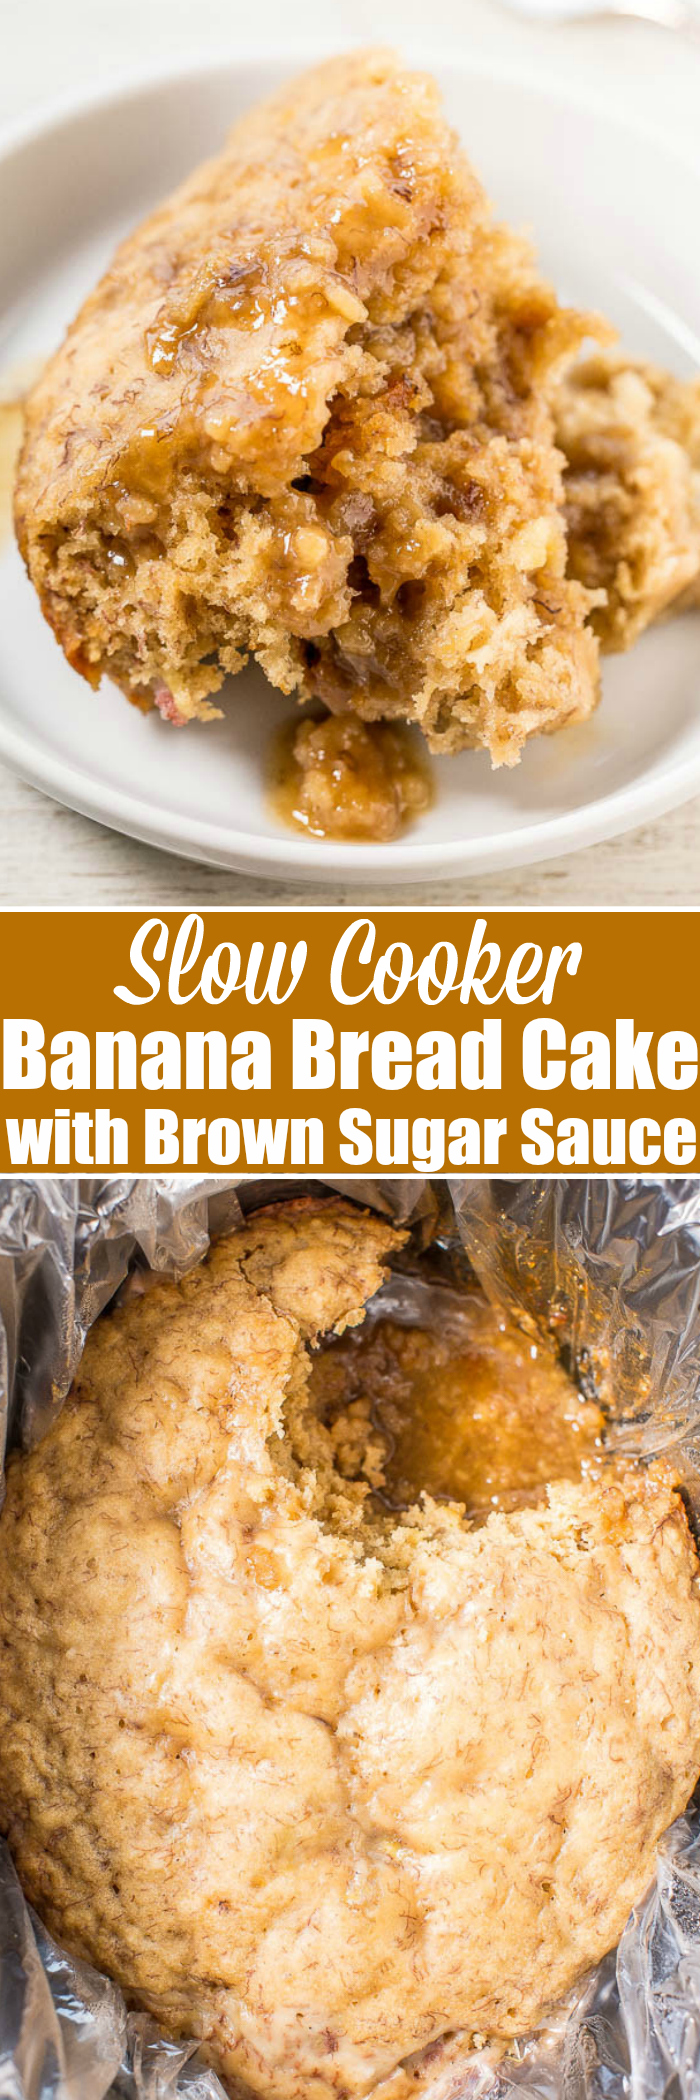 Slow Cooker Banana Bread Cake with Brown Sugar Sauce — Soft, tender CrockPot banana bread with a caramely, brown sugar sauce that develops while the bread cooks!! If you've never made a slow cooker dessert, start with this easy recipe!!